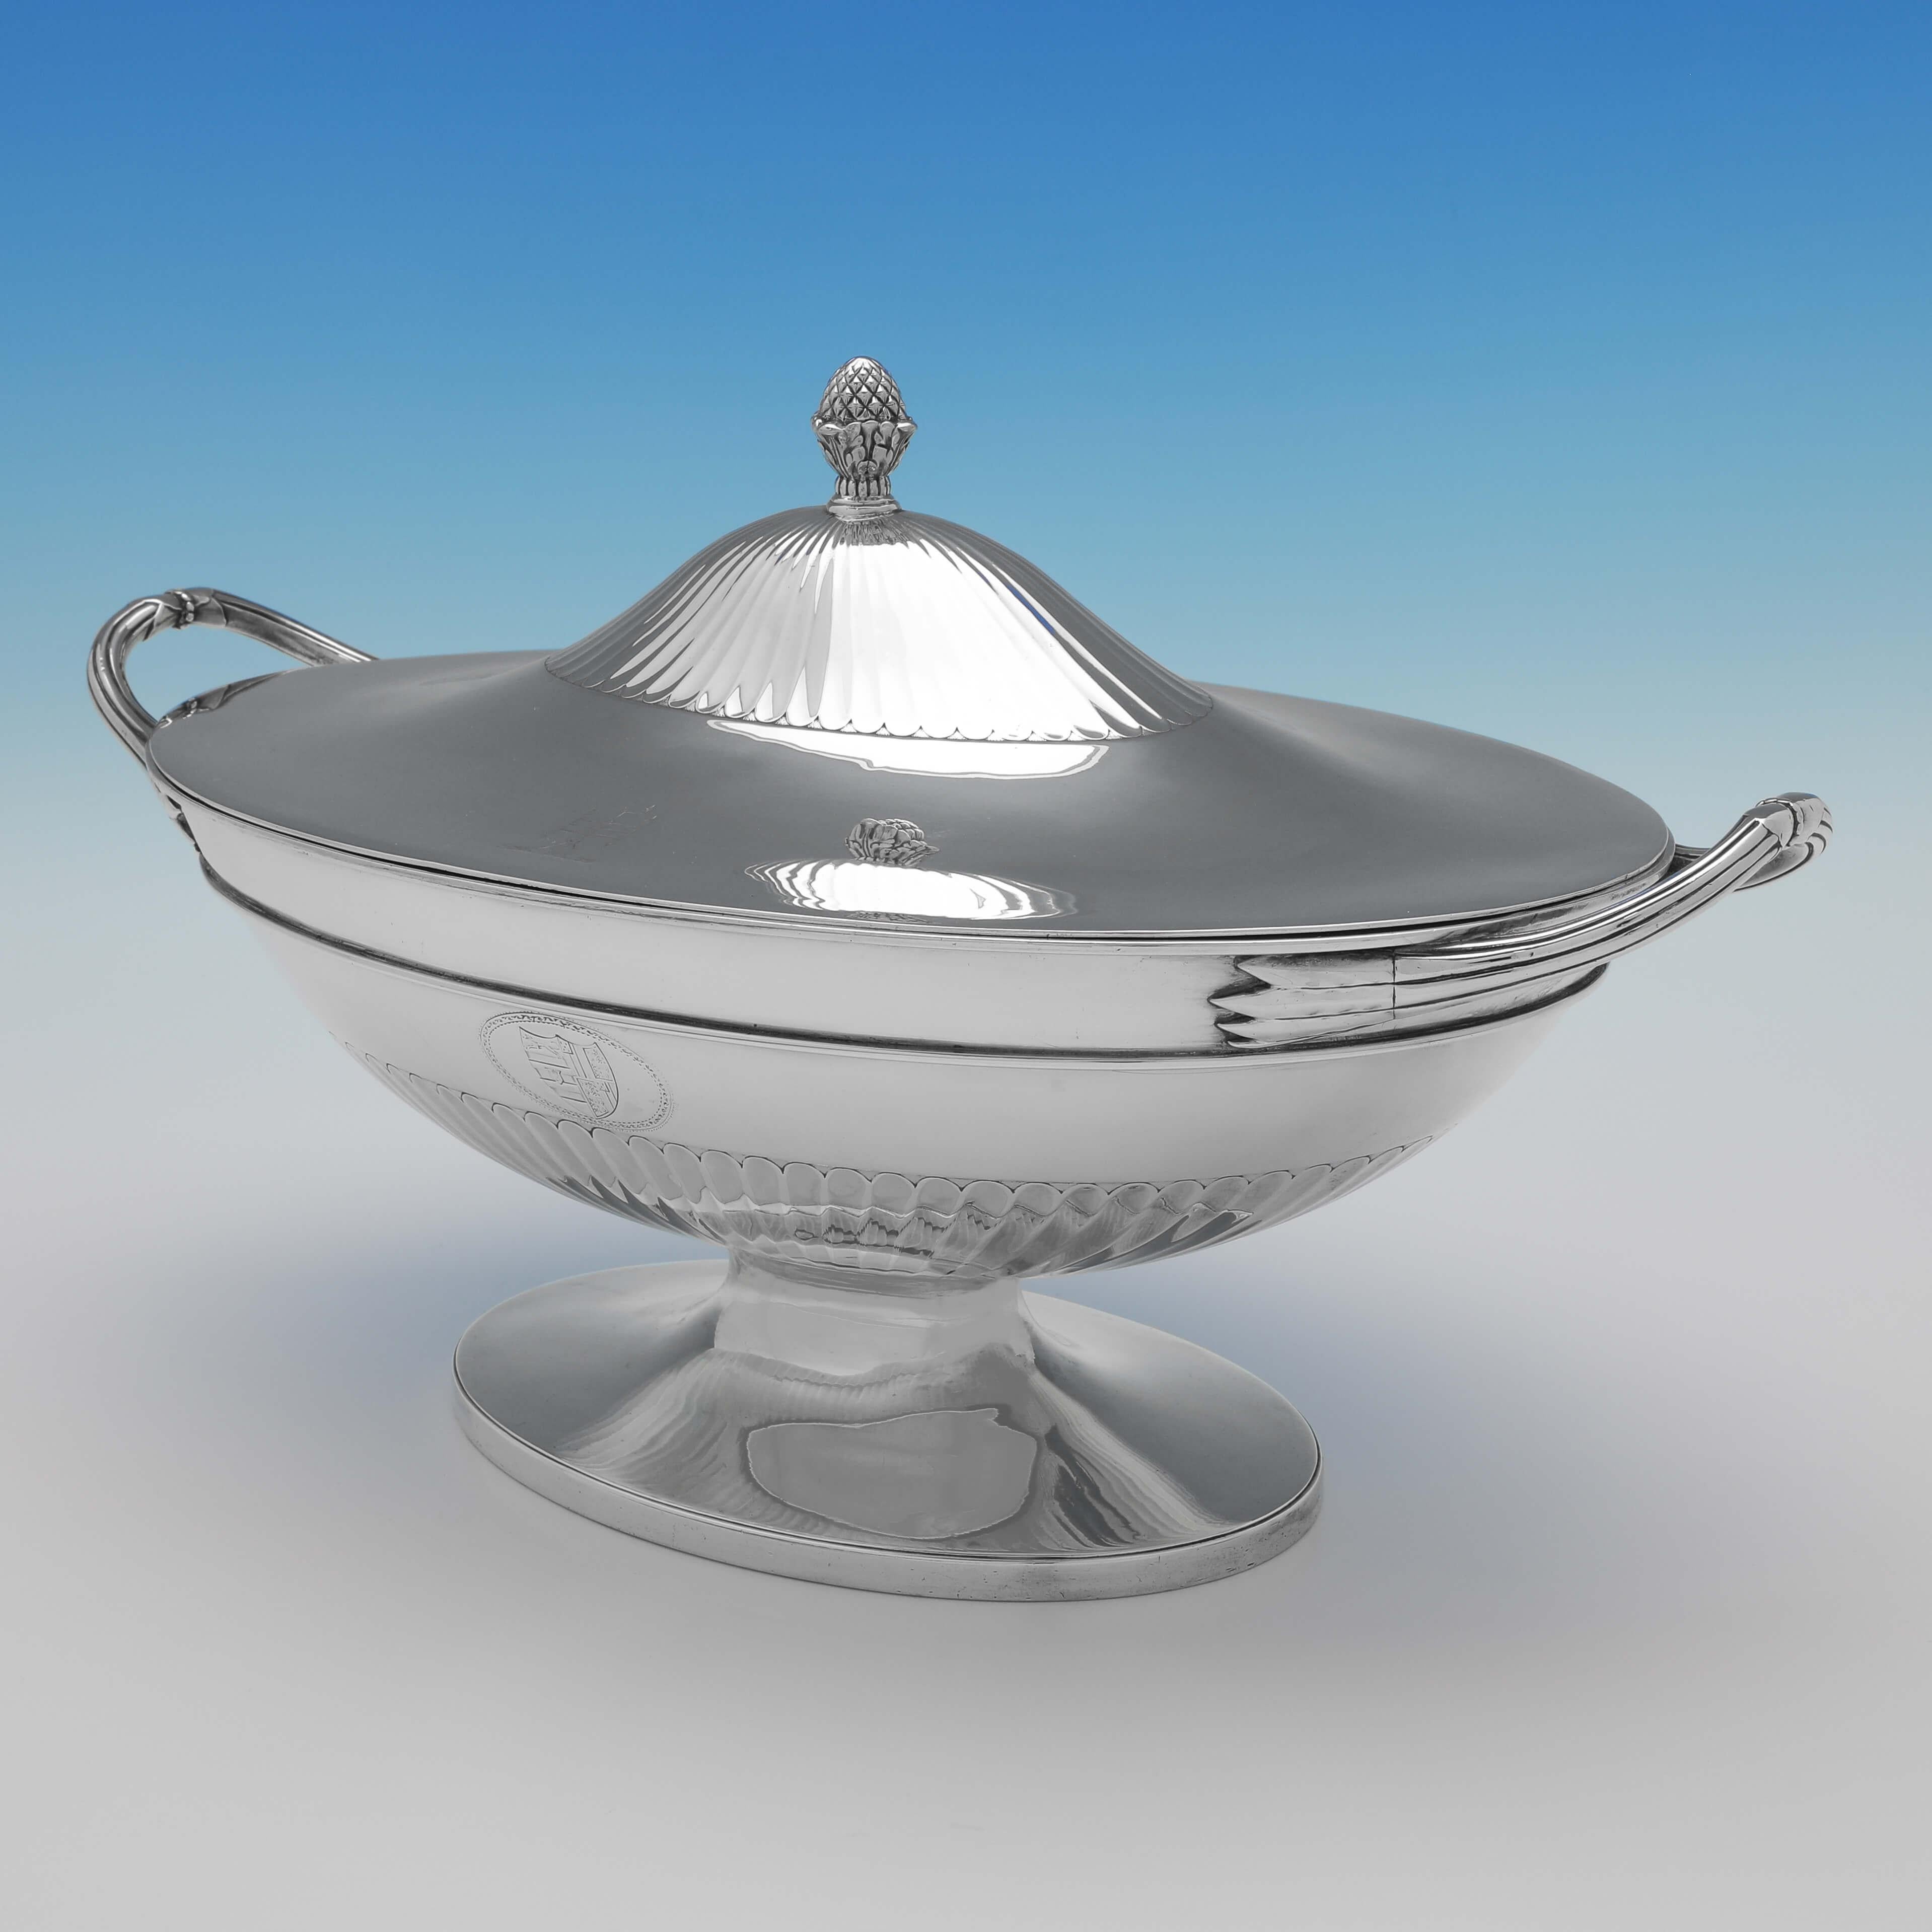 Hallmarked in London in 1784 by John Wakelin & William Taylor, this handsome, George III, Antique Sterling Silver Soup Tureen, is Neoclassical in style, featuring sunken half fluting to the body and lid, reed borders, an engraved coat of arms and an